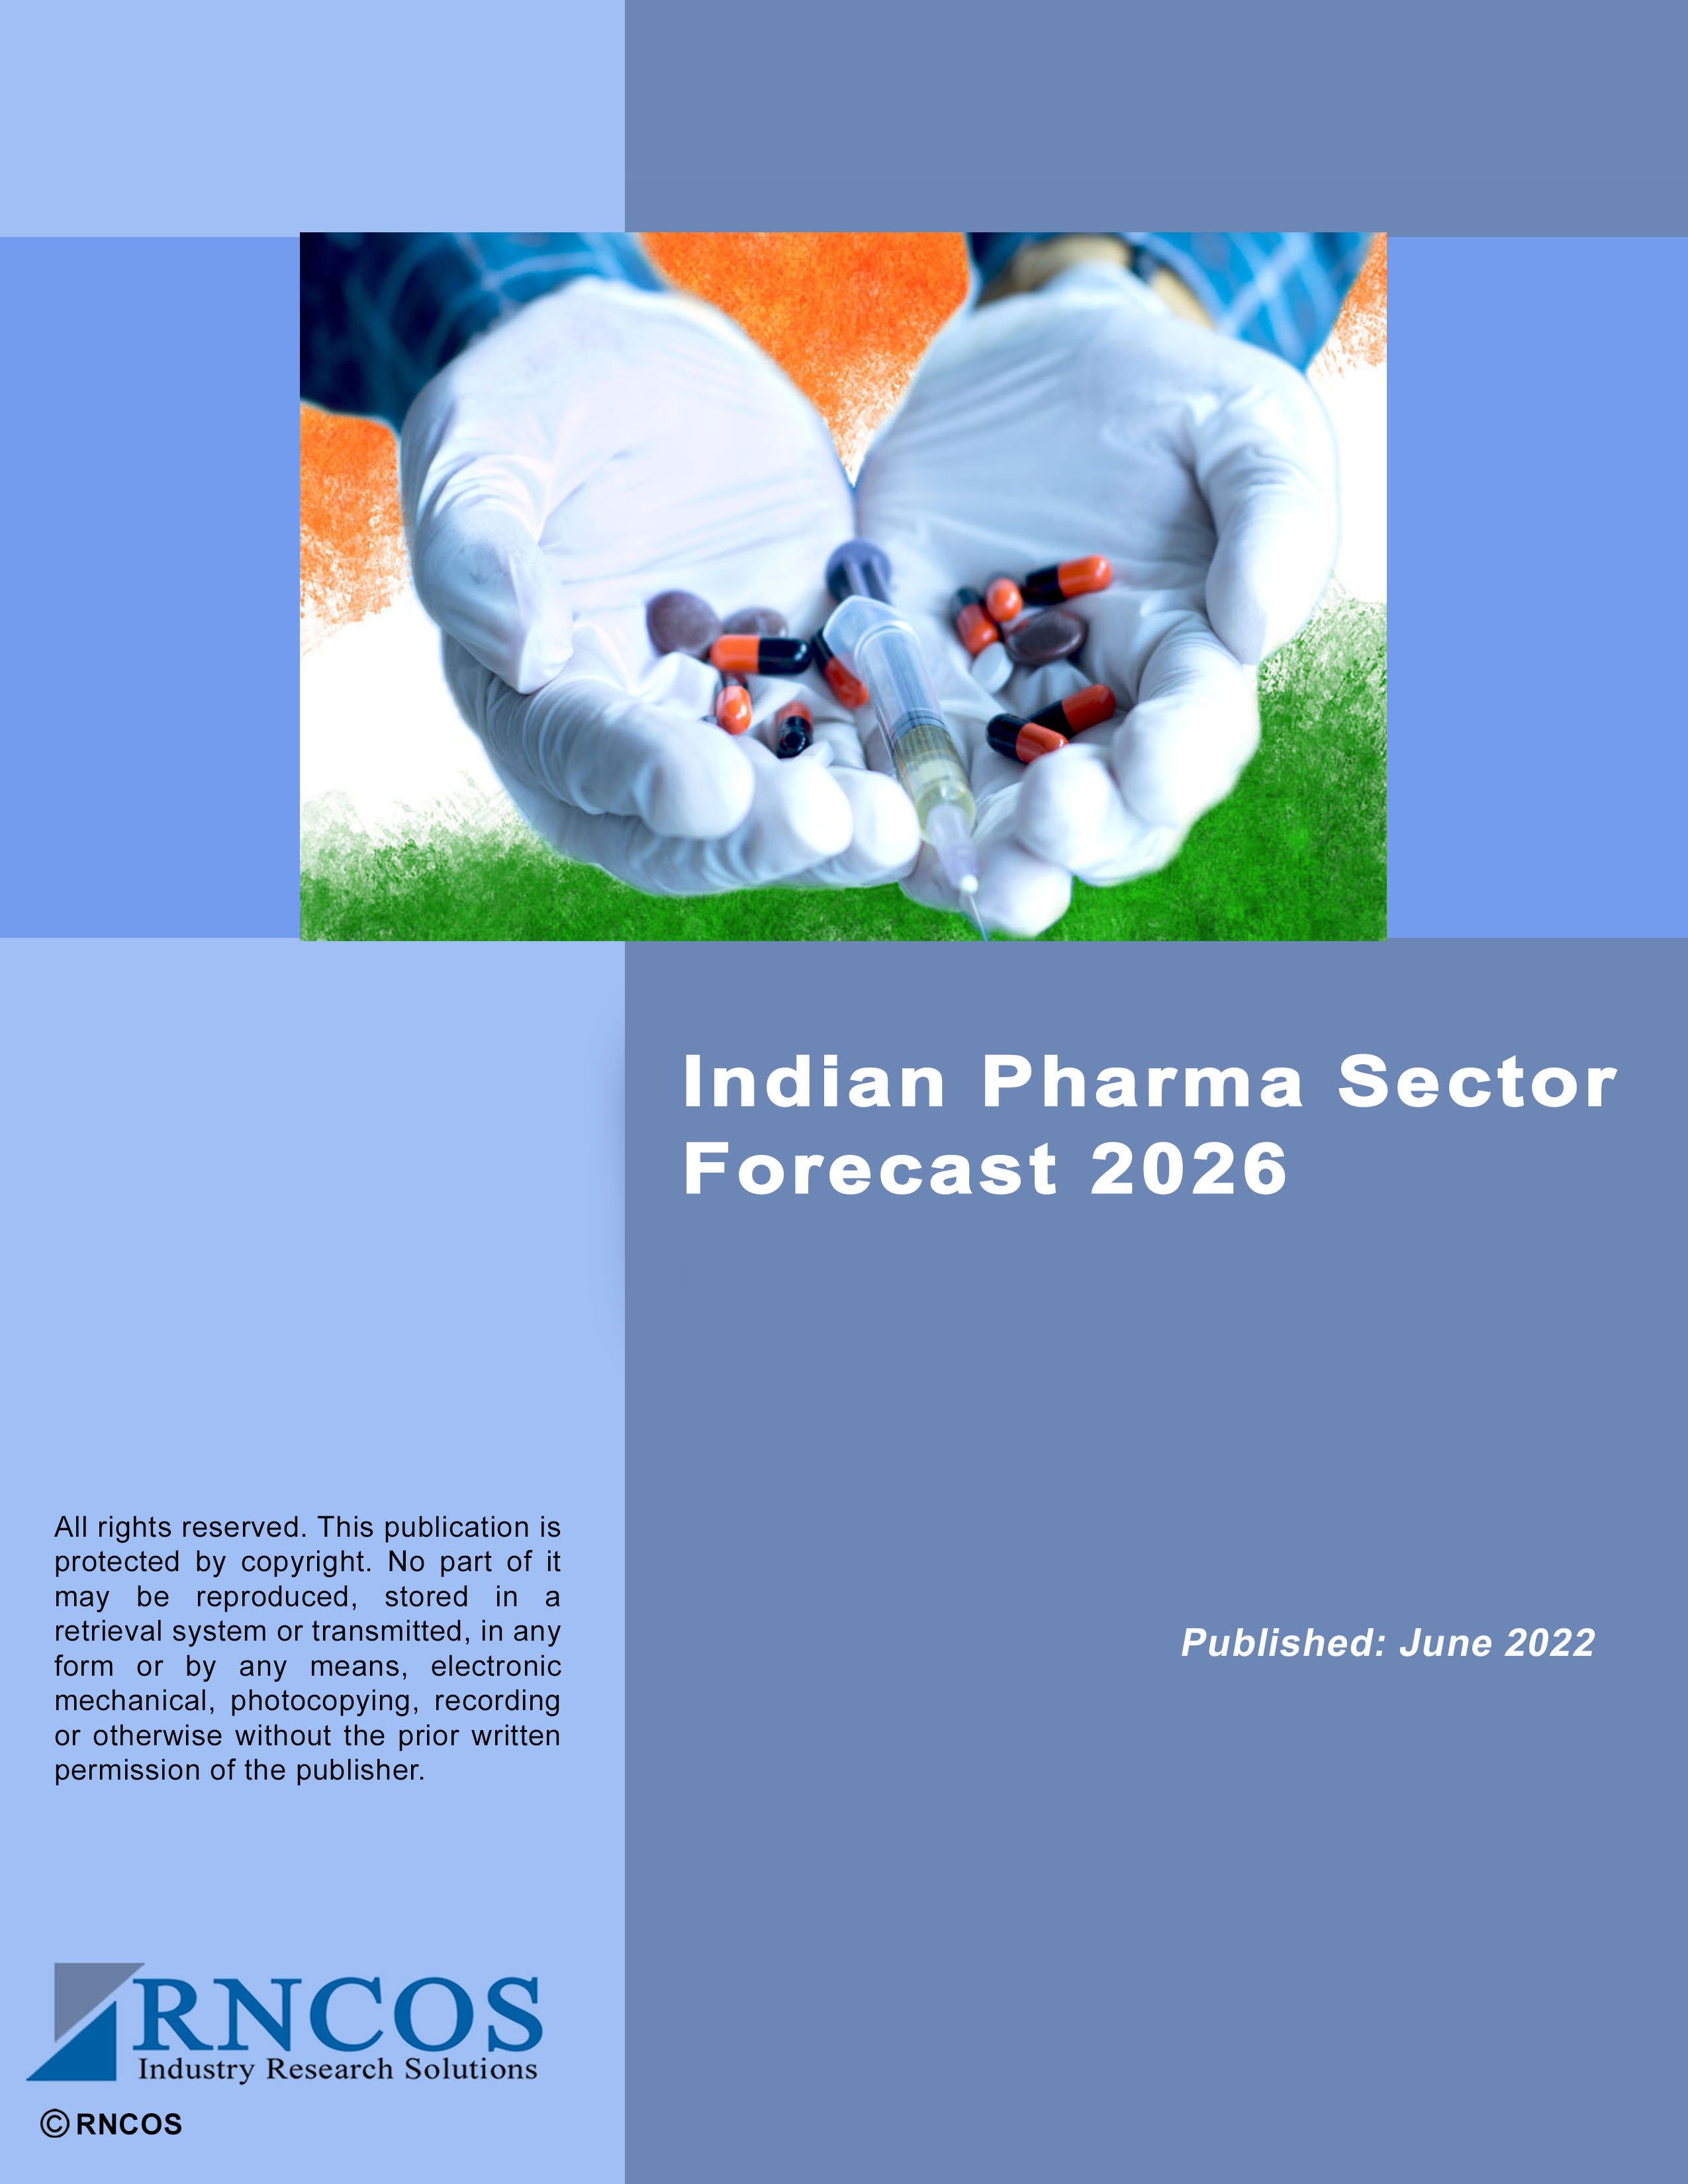 Indian Pharma Sector Forecast 2014 Research Report